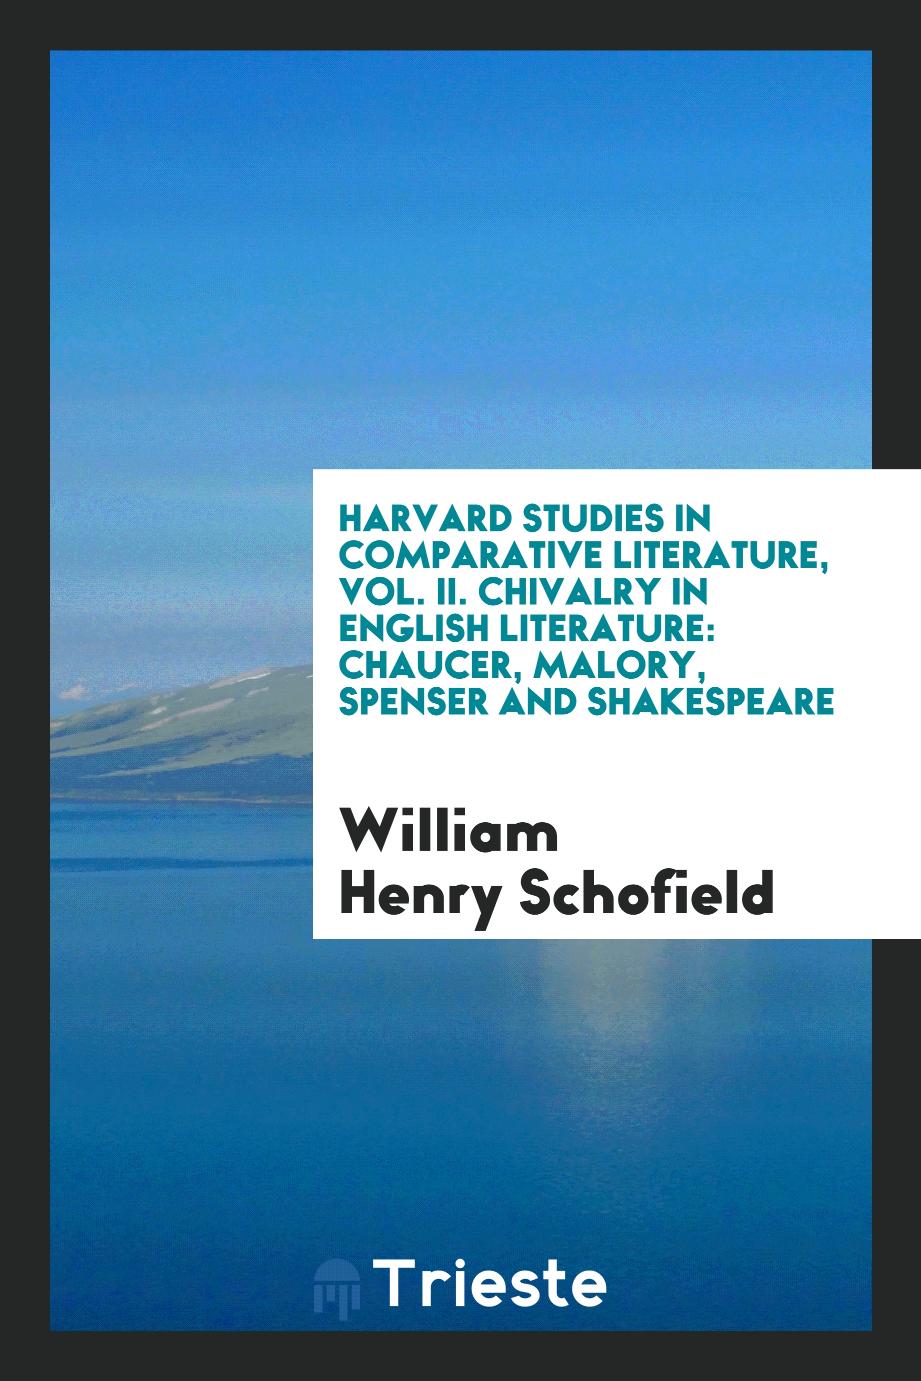 Harvard Studies in Comparative Literature, Vol. II. Chivalry in English Literature: Chaucer, Malory, Spenser and Shakespeare